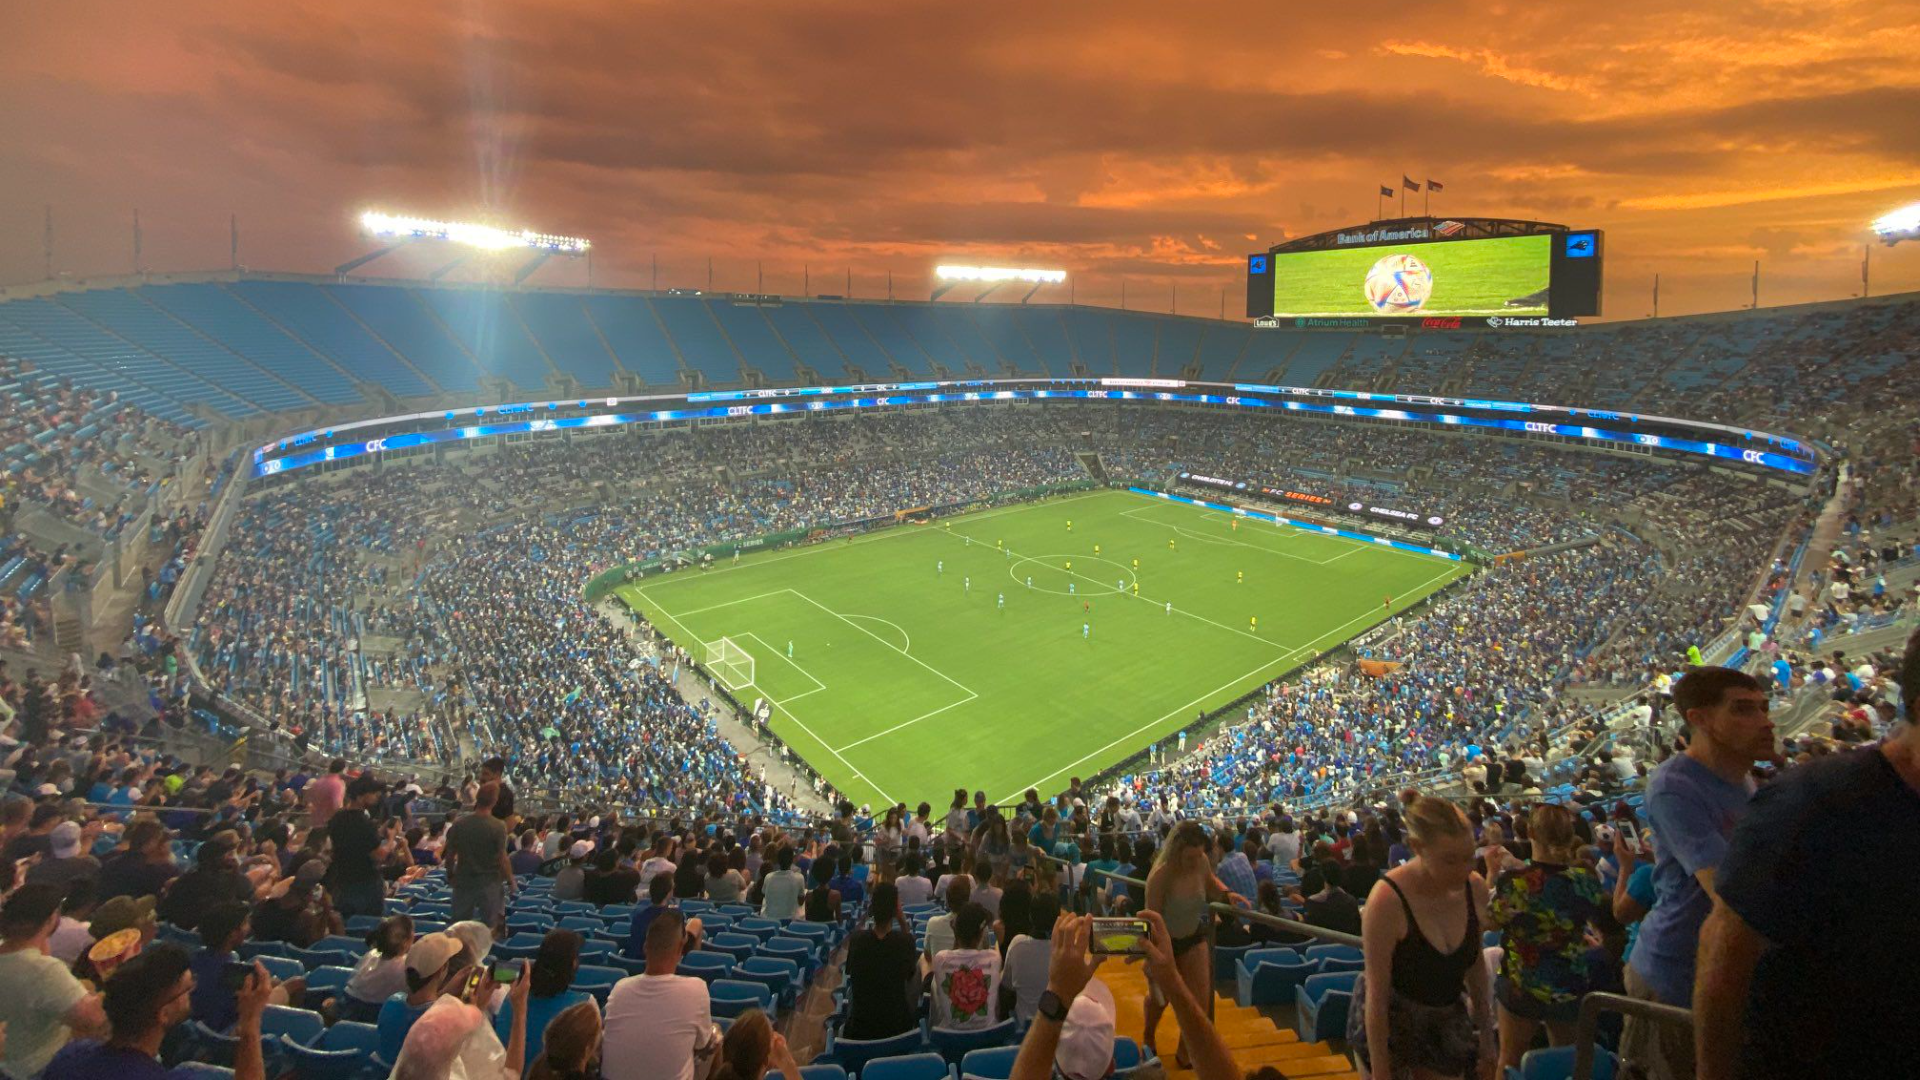 Copa America 2024 stadiums: List of host cities, venues for international  soccer tournament in USA